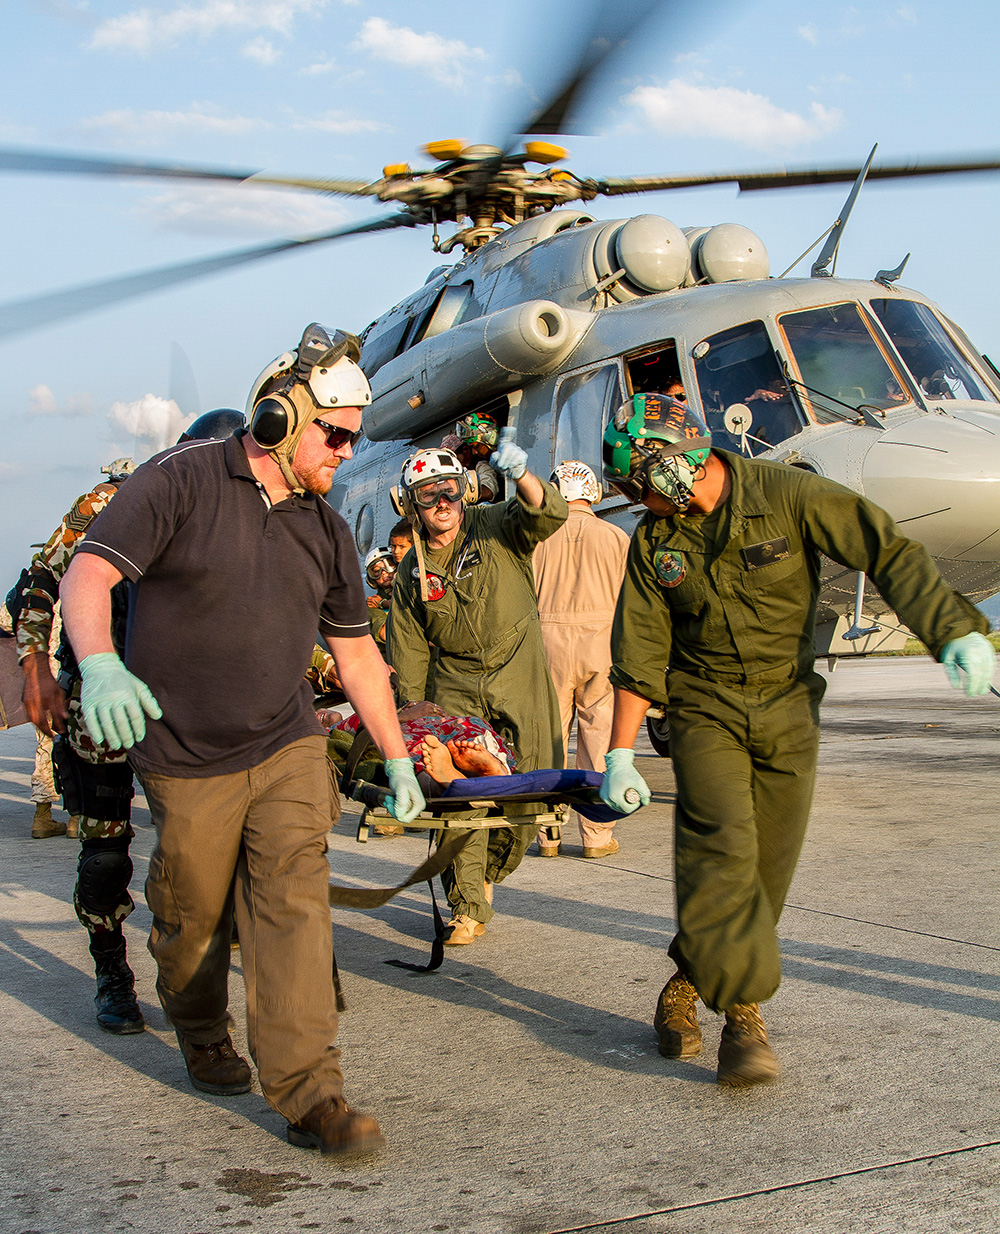 Relief personell carrying some affected by a disaster on a stretcher with a helicopter taking off behind them.